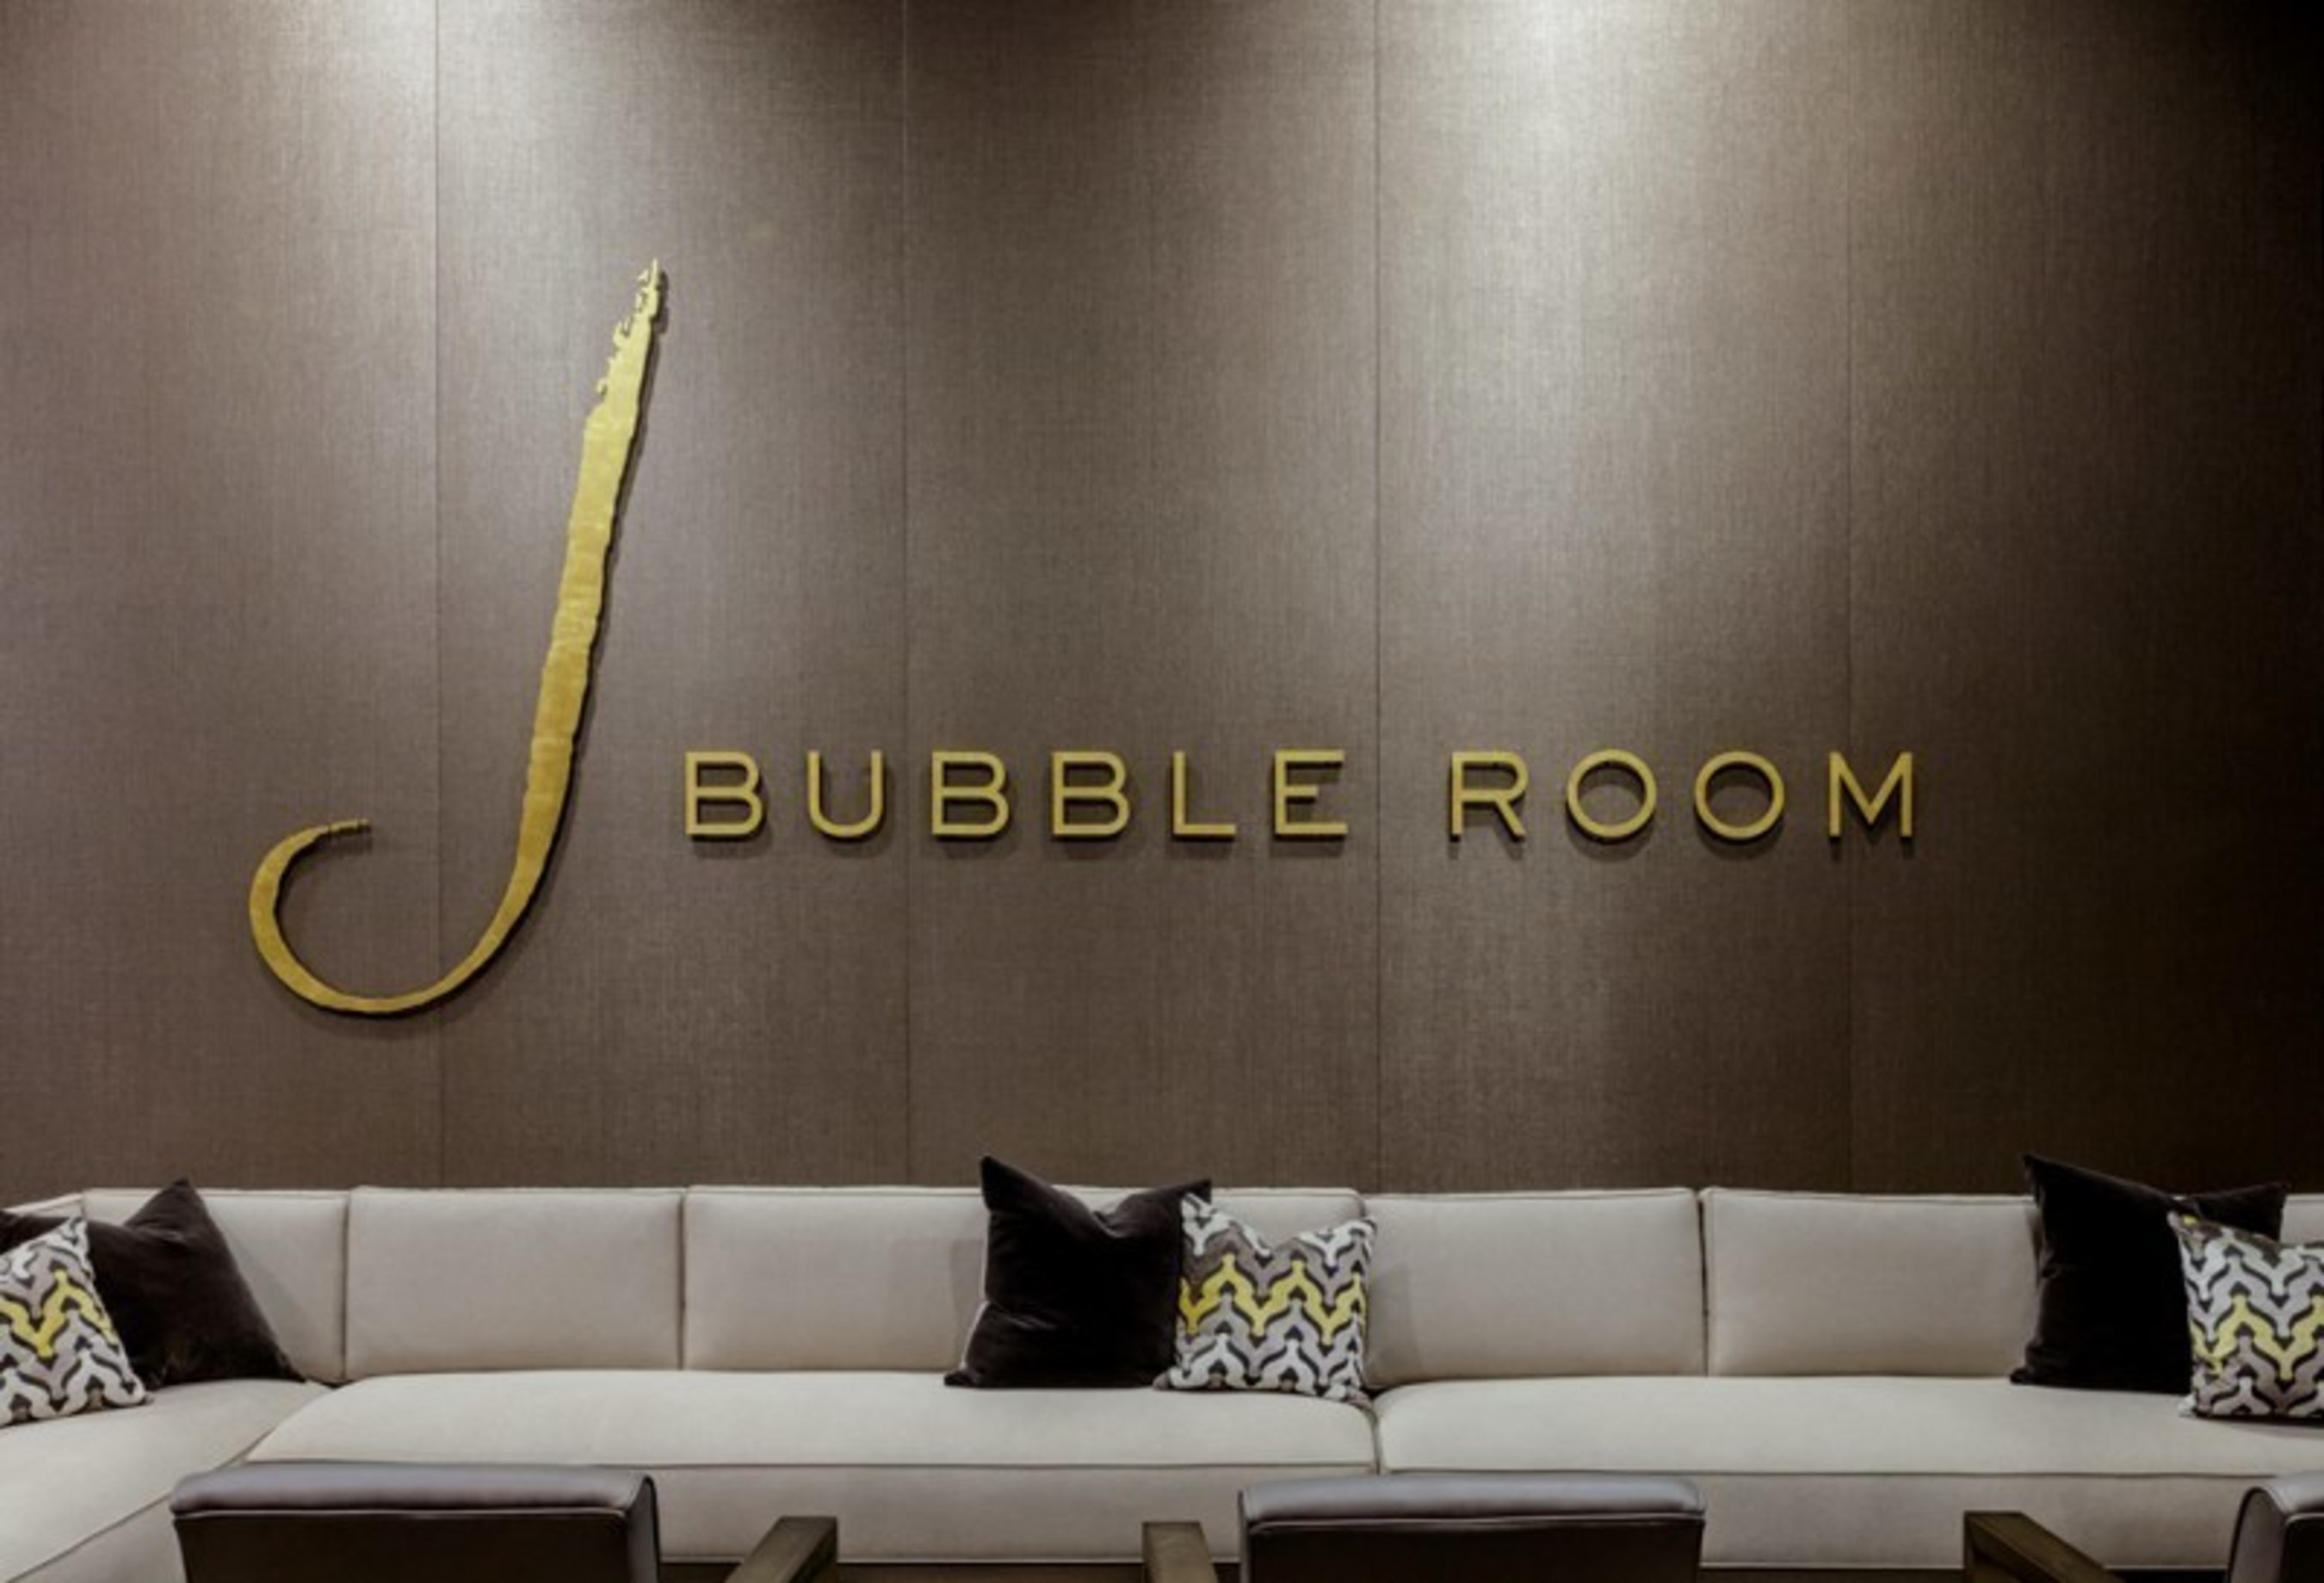 The Bubble Room at J Vineyards & Winery